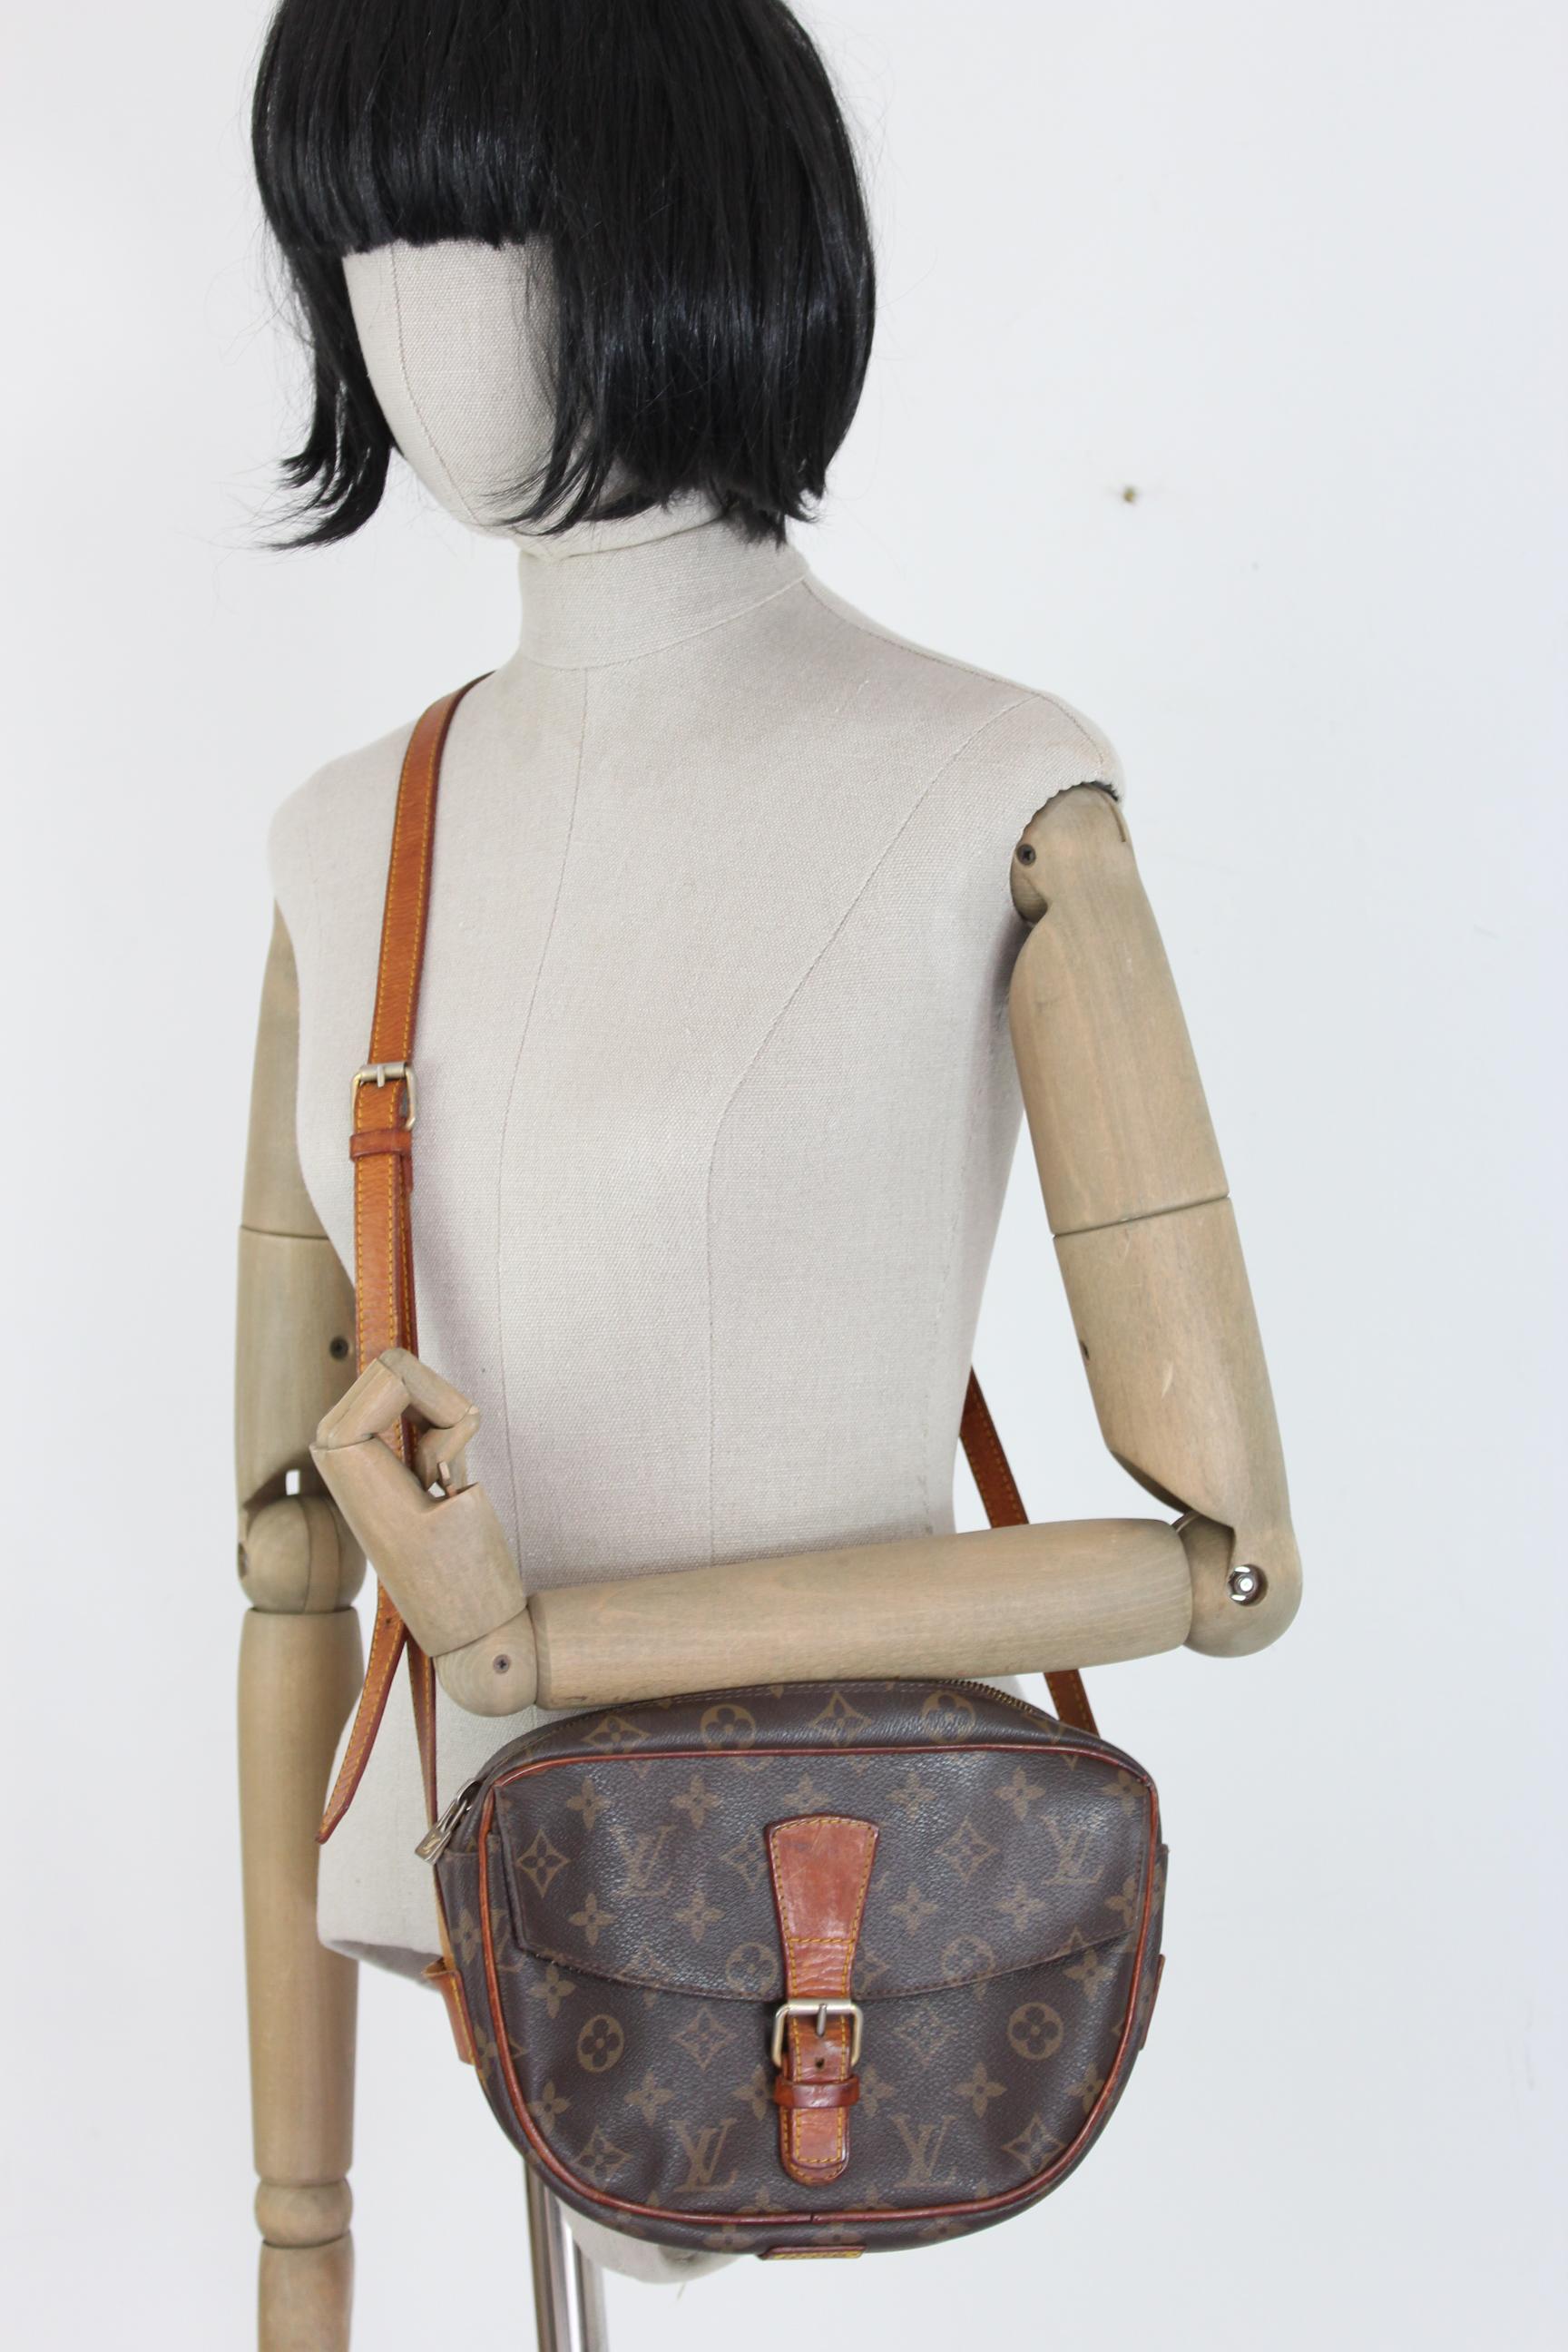 Louis Vuitton Jeune Fille vintage 70s shoulder bag. Crossbody bag, monogram print, in canvas and leather, colour brown. Adjustable shoulder strap. External and internal pockets. Zipper closure. Made in France. Very good vintage conditions, some